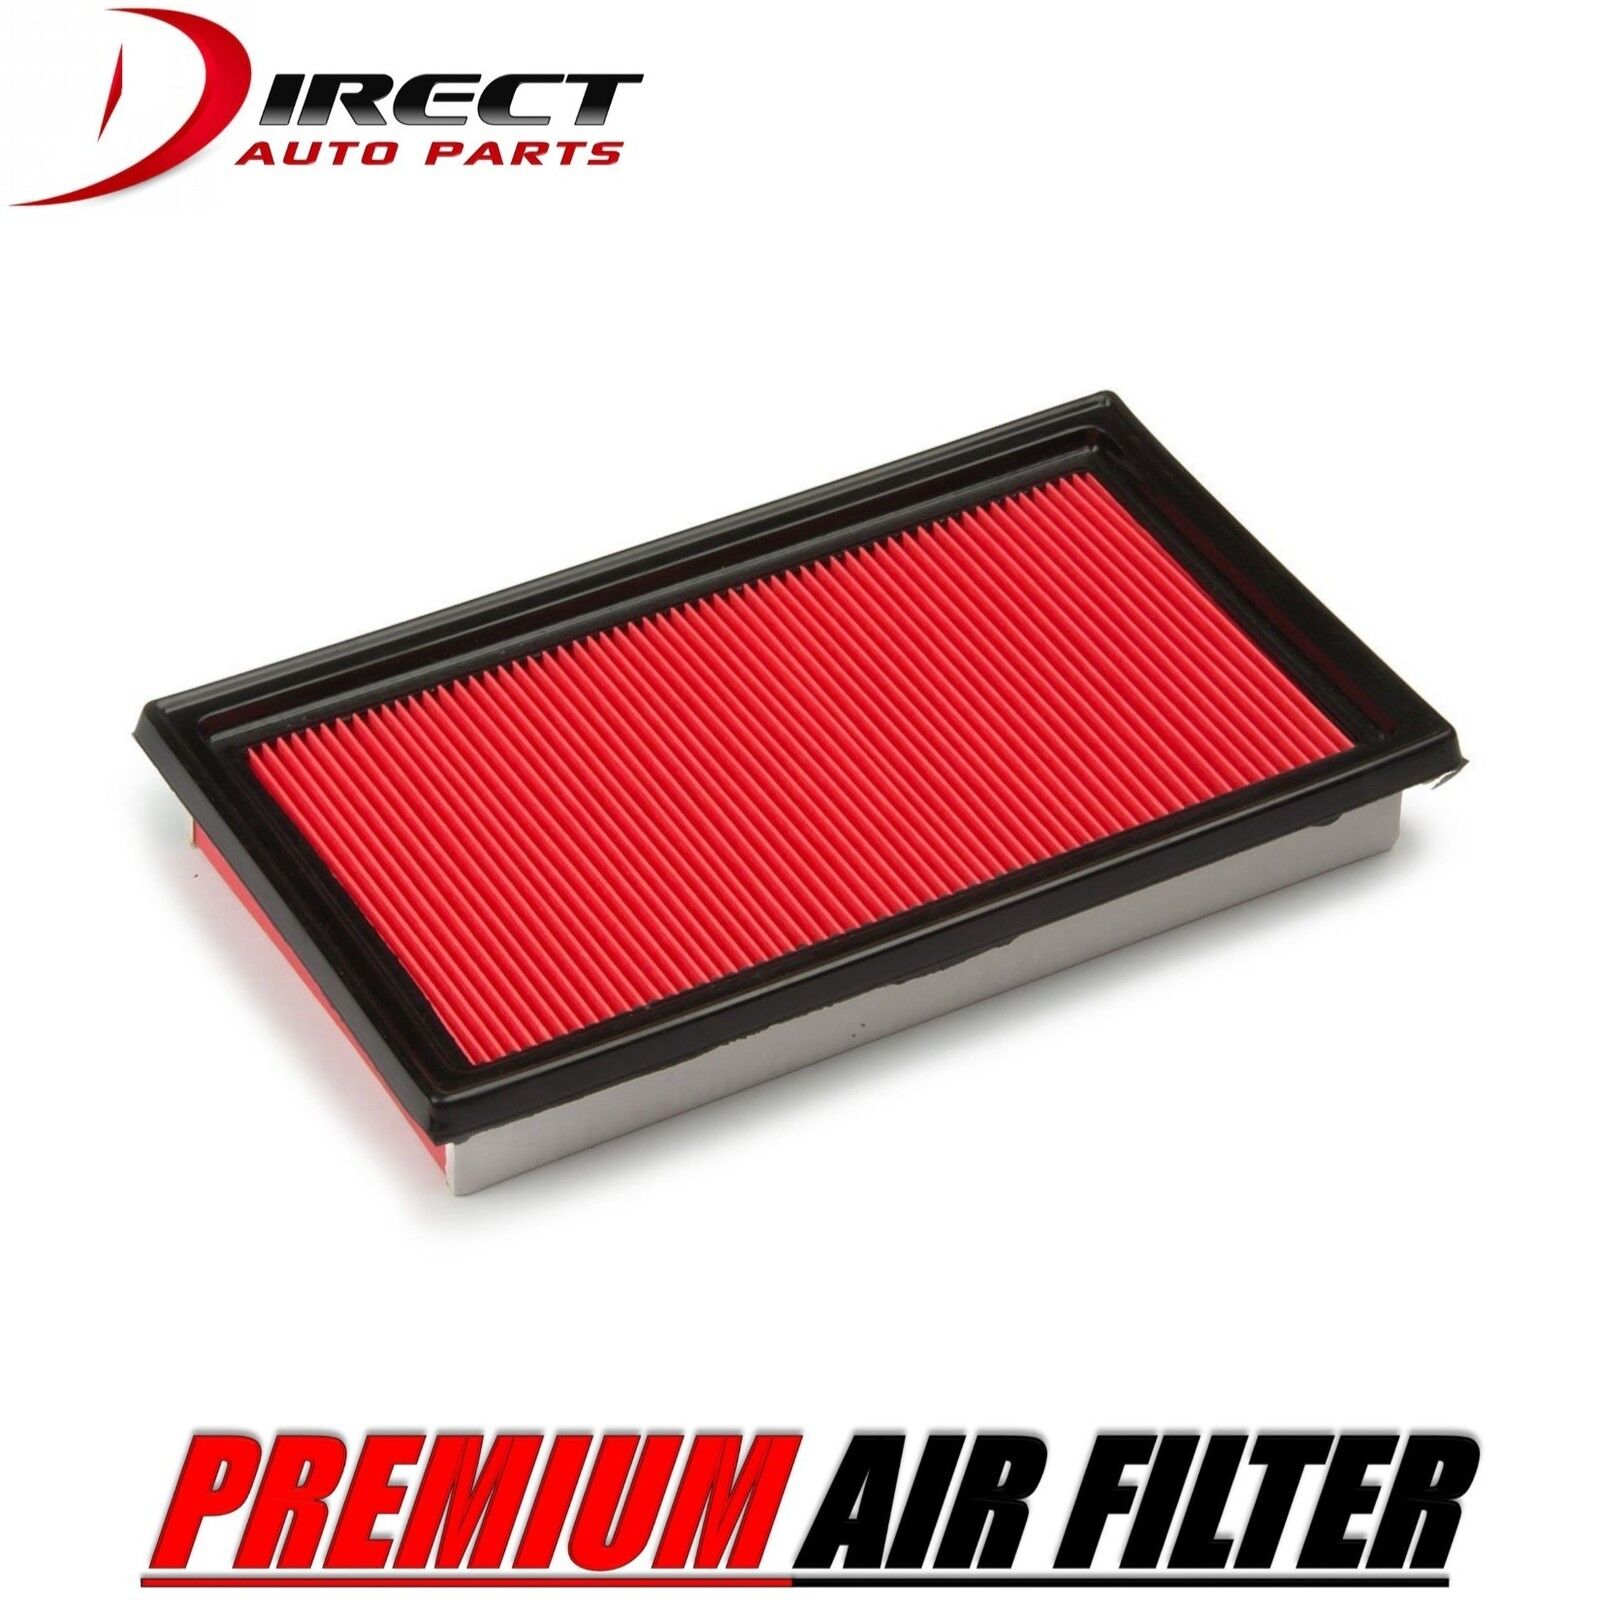 AIR FILTER FOR INFINITI FITS FX35 2003 - 2008 3.5L ENGINE